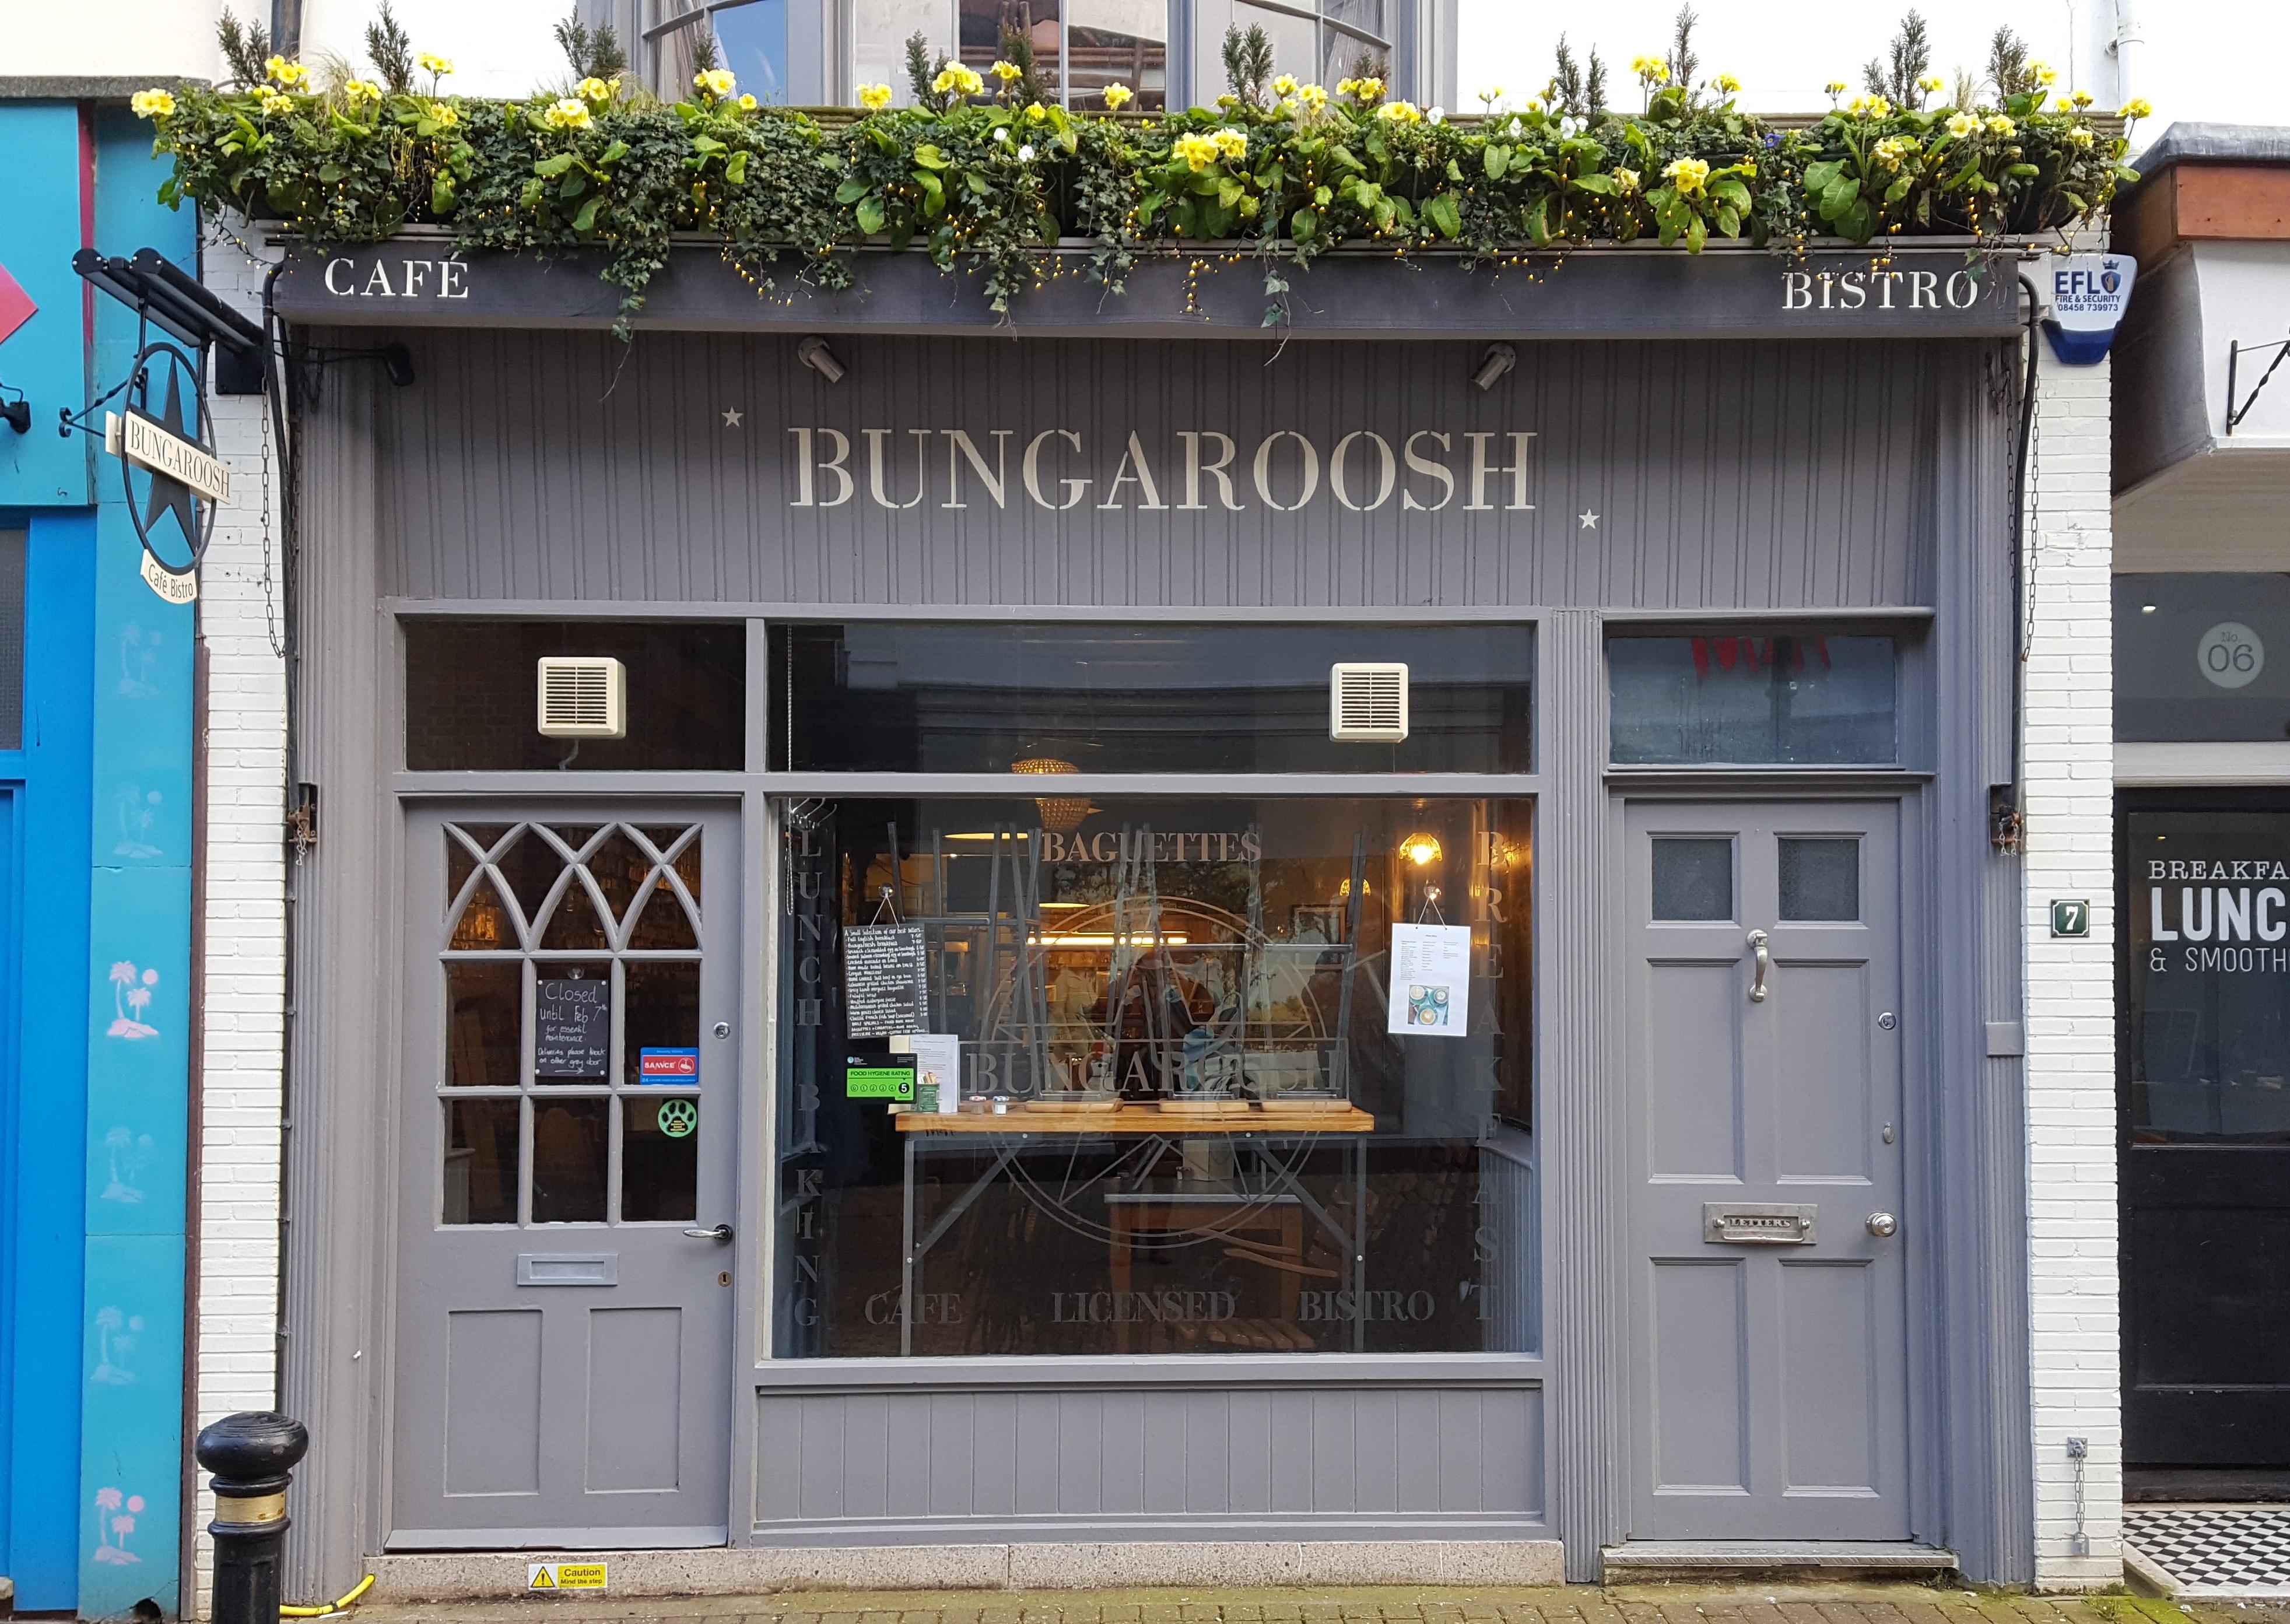 Bungaroosh Café Bistro has been serving diners in Bath Place since February 2019